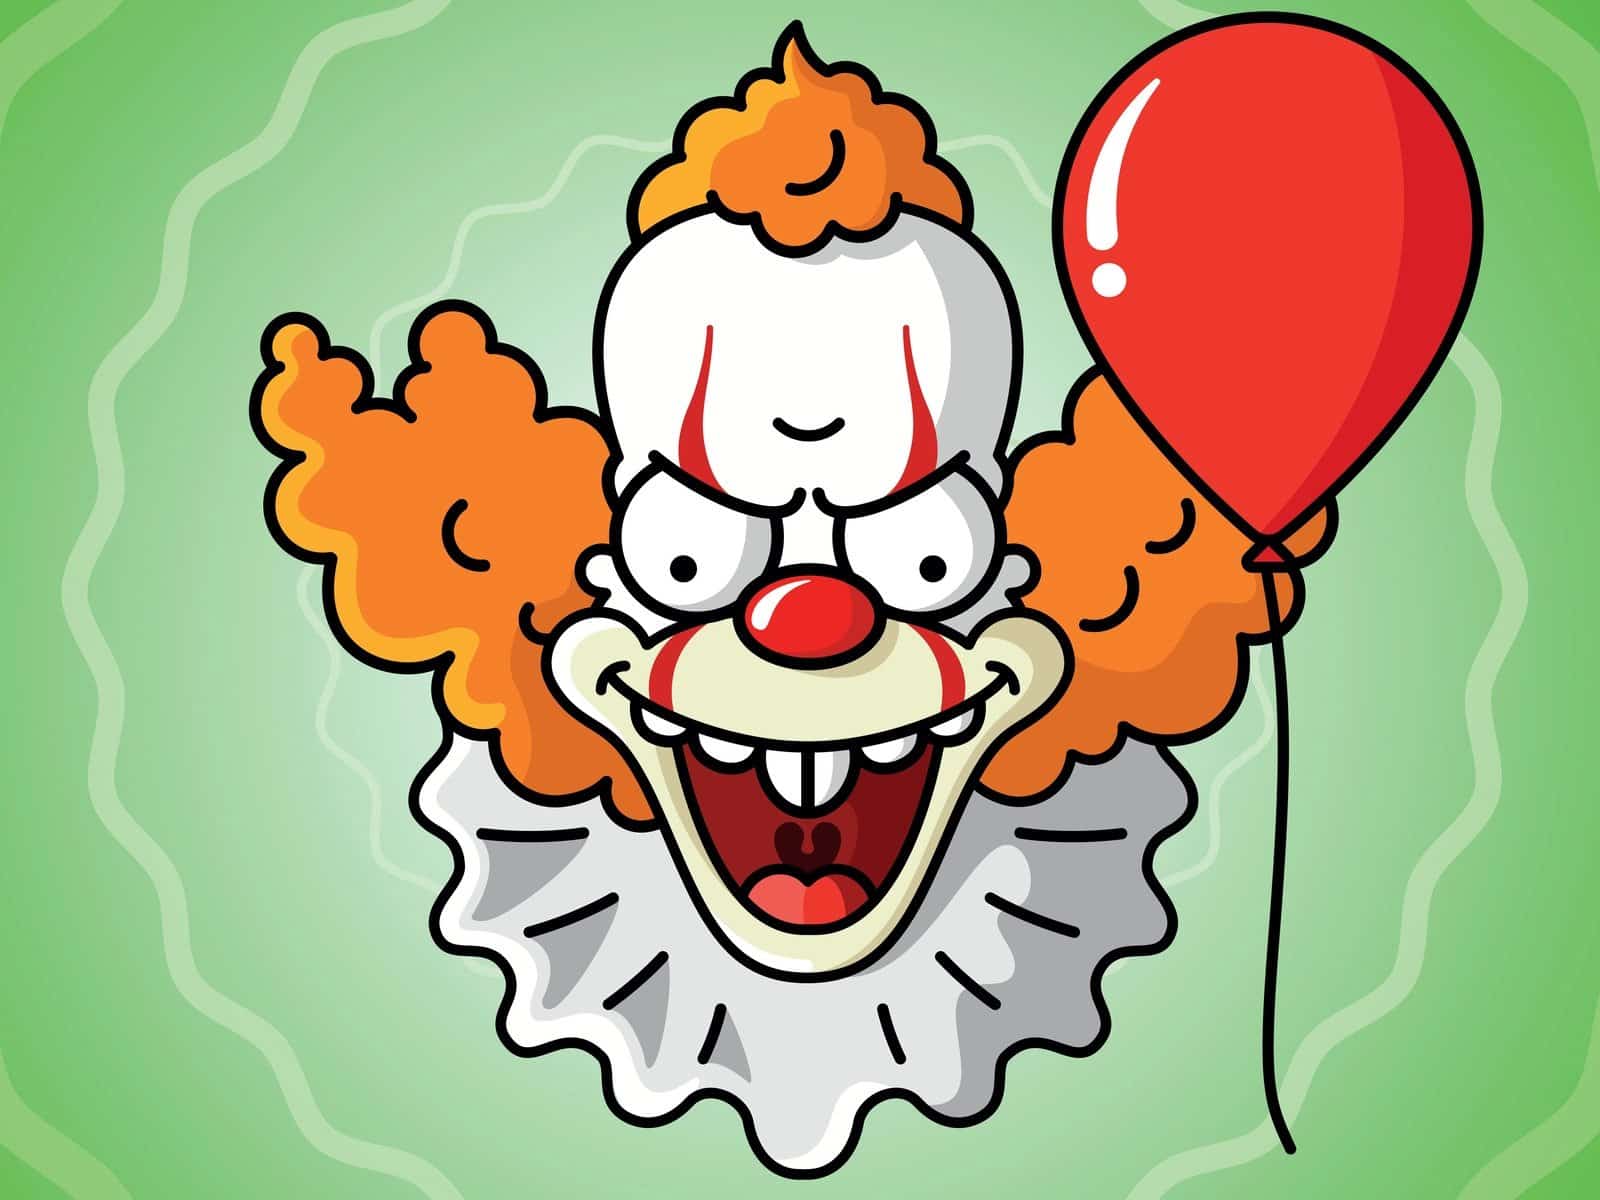 krusty pennywise